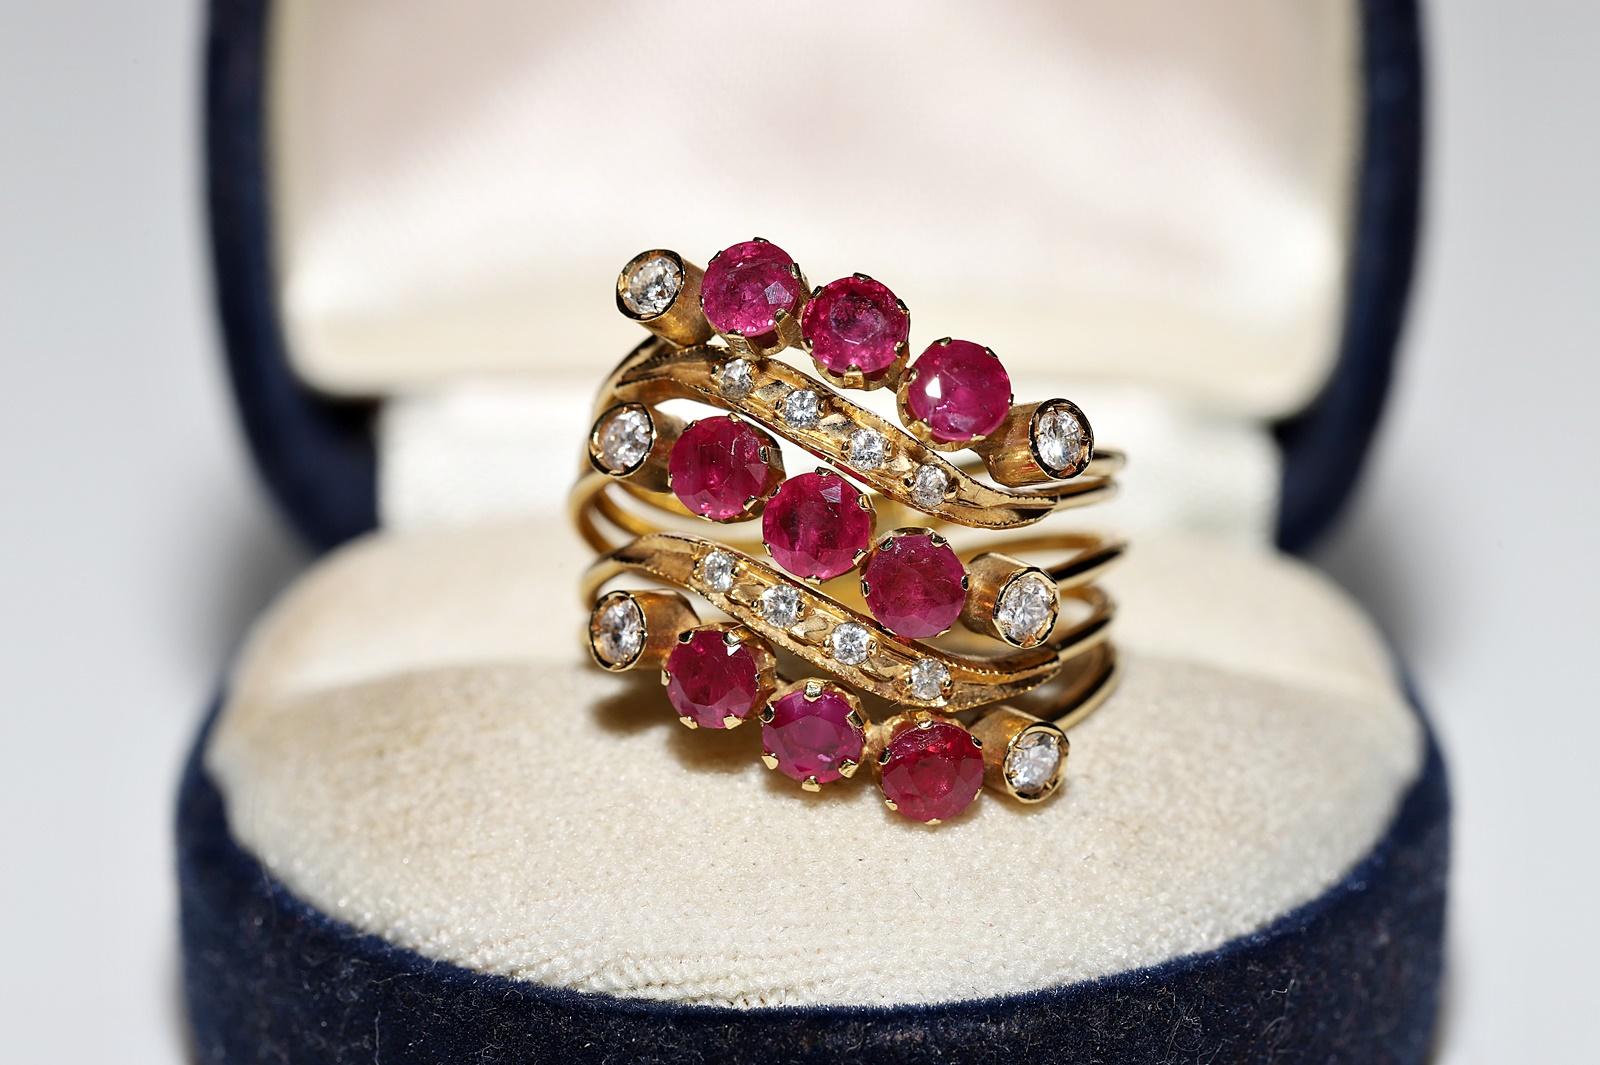 Vintage Circa 1980s 18k Gold Natural Diamond And Ruby Decorated Ring In Good Condition For Sale In Fatih/İstanbul, 34